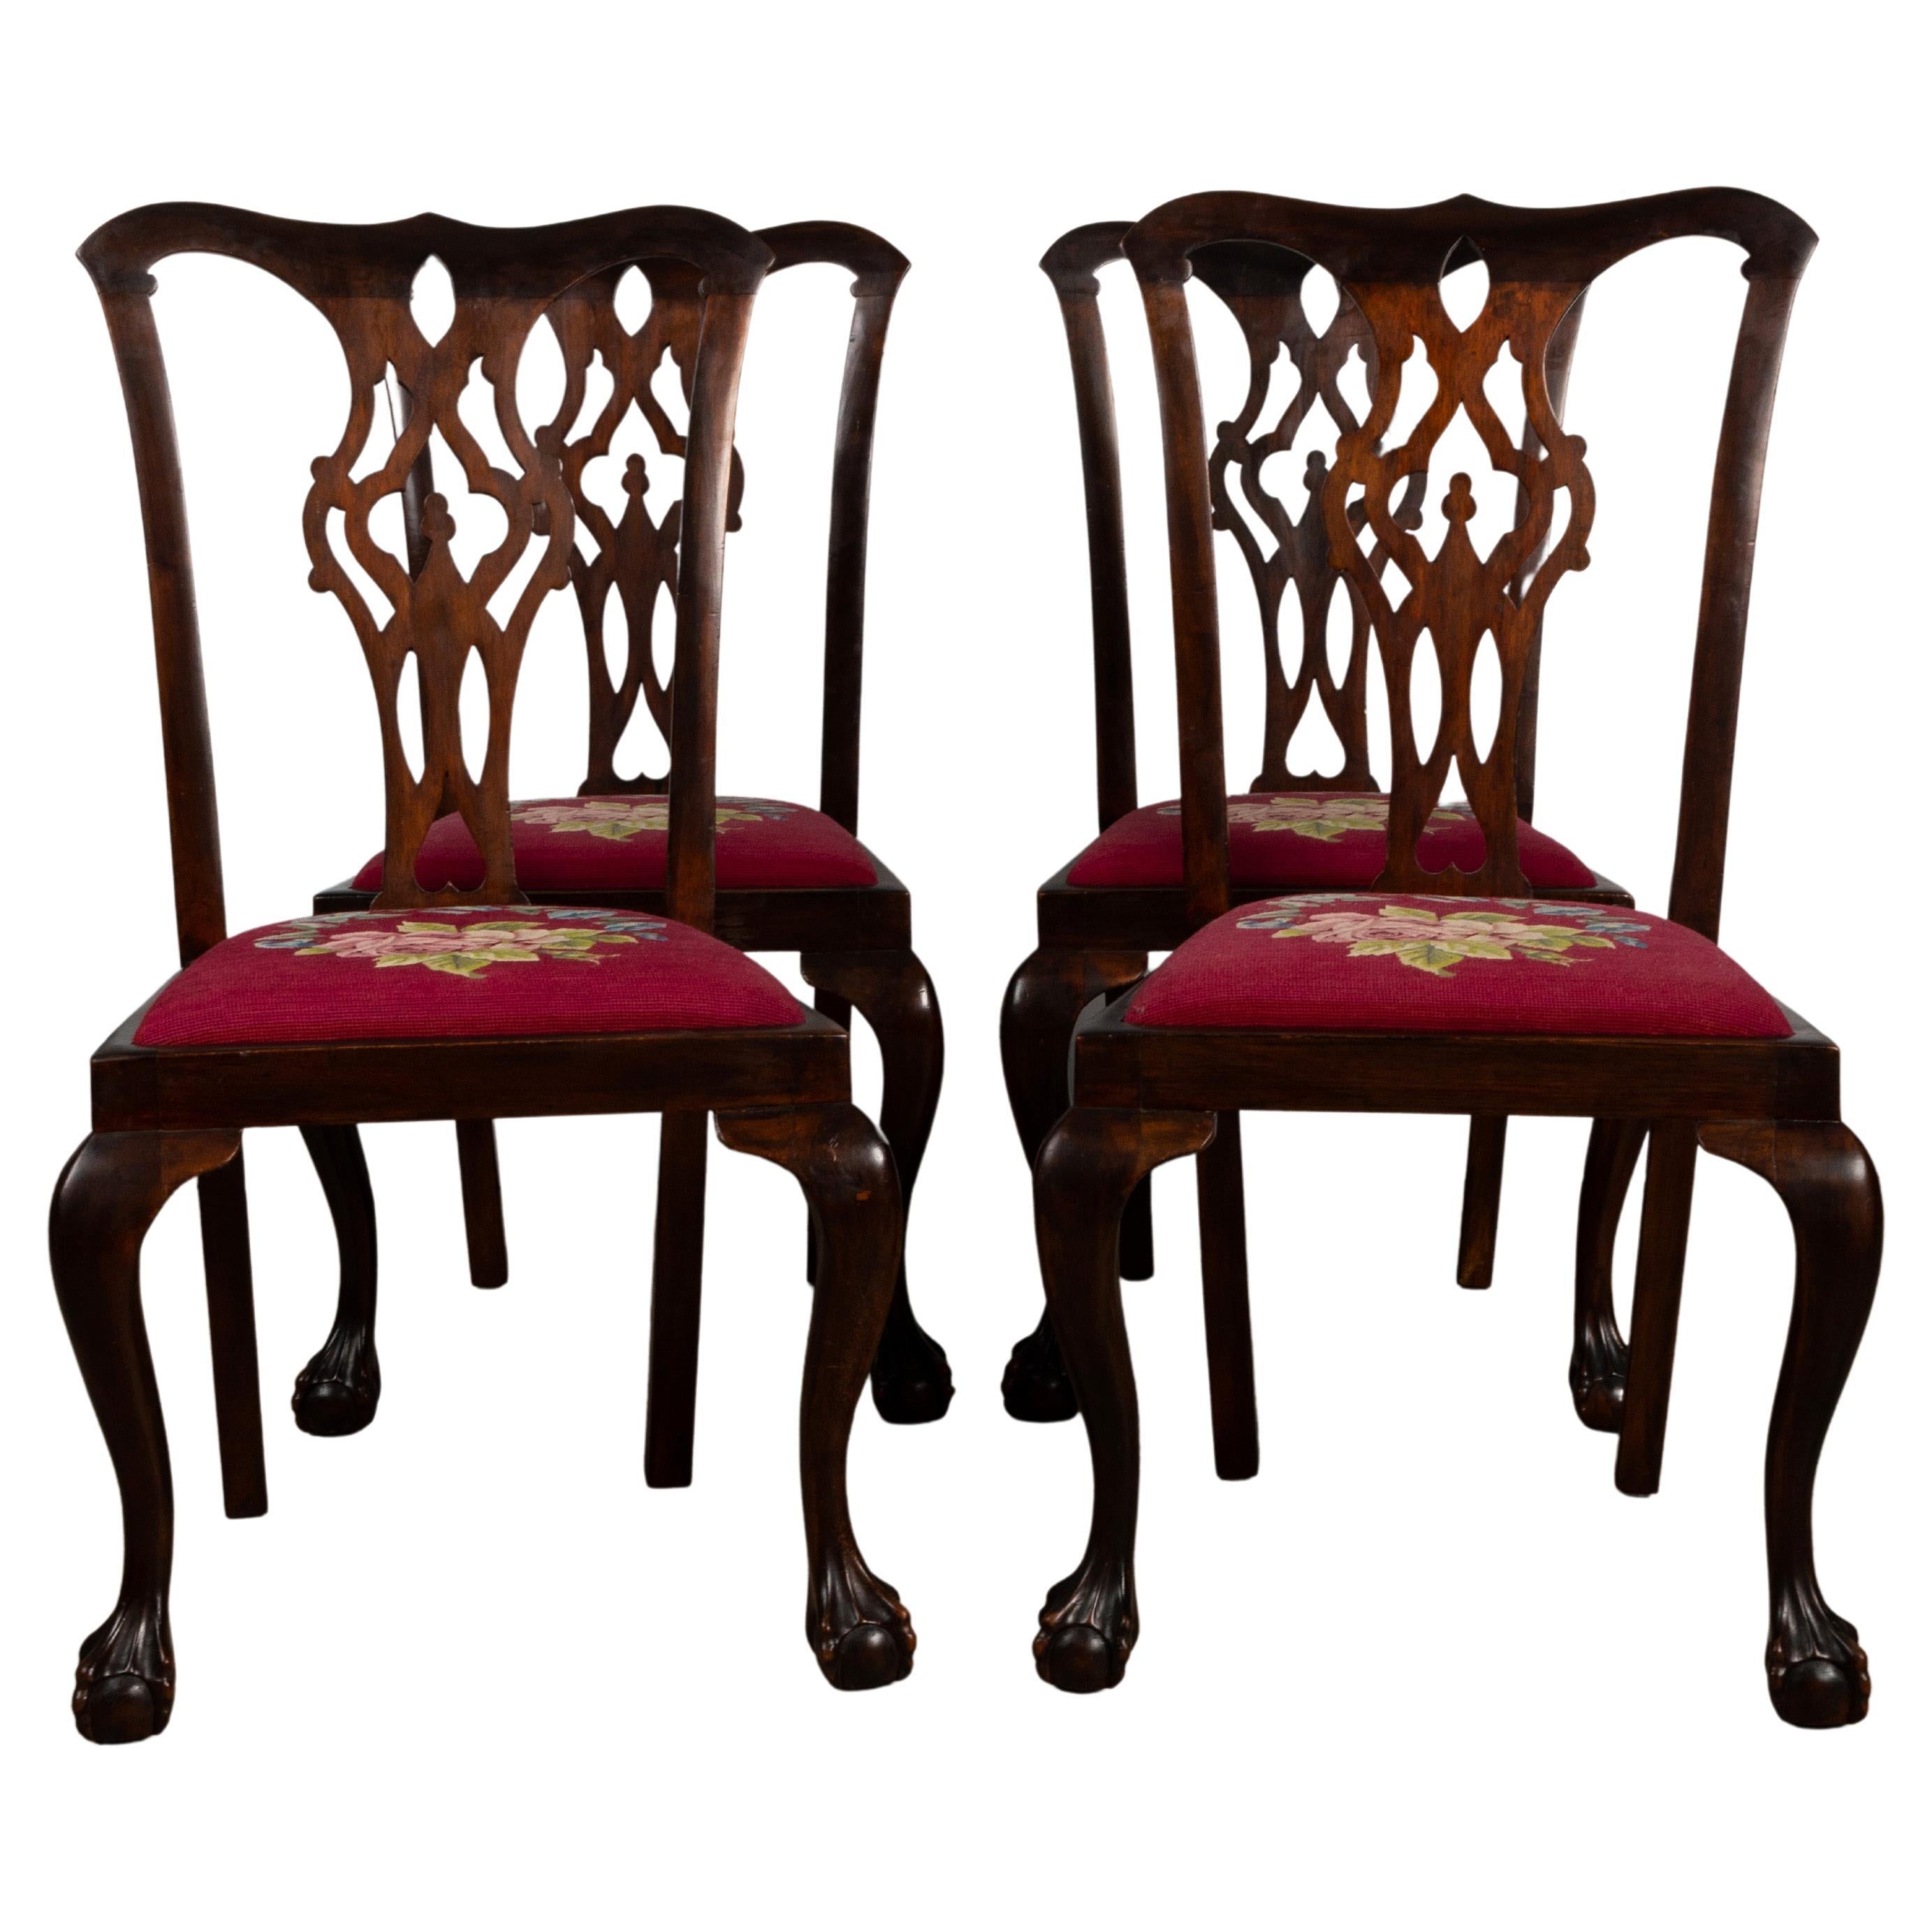 4 Antique English 19th Century Chippendale Revival Mahogany Chairs For Sale